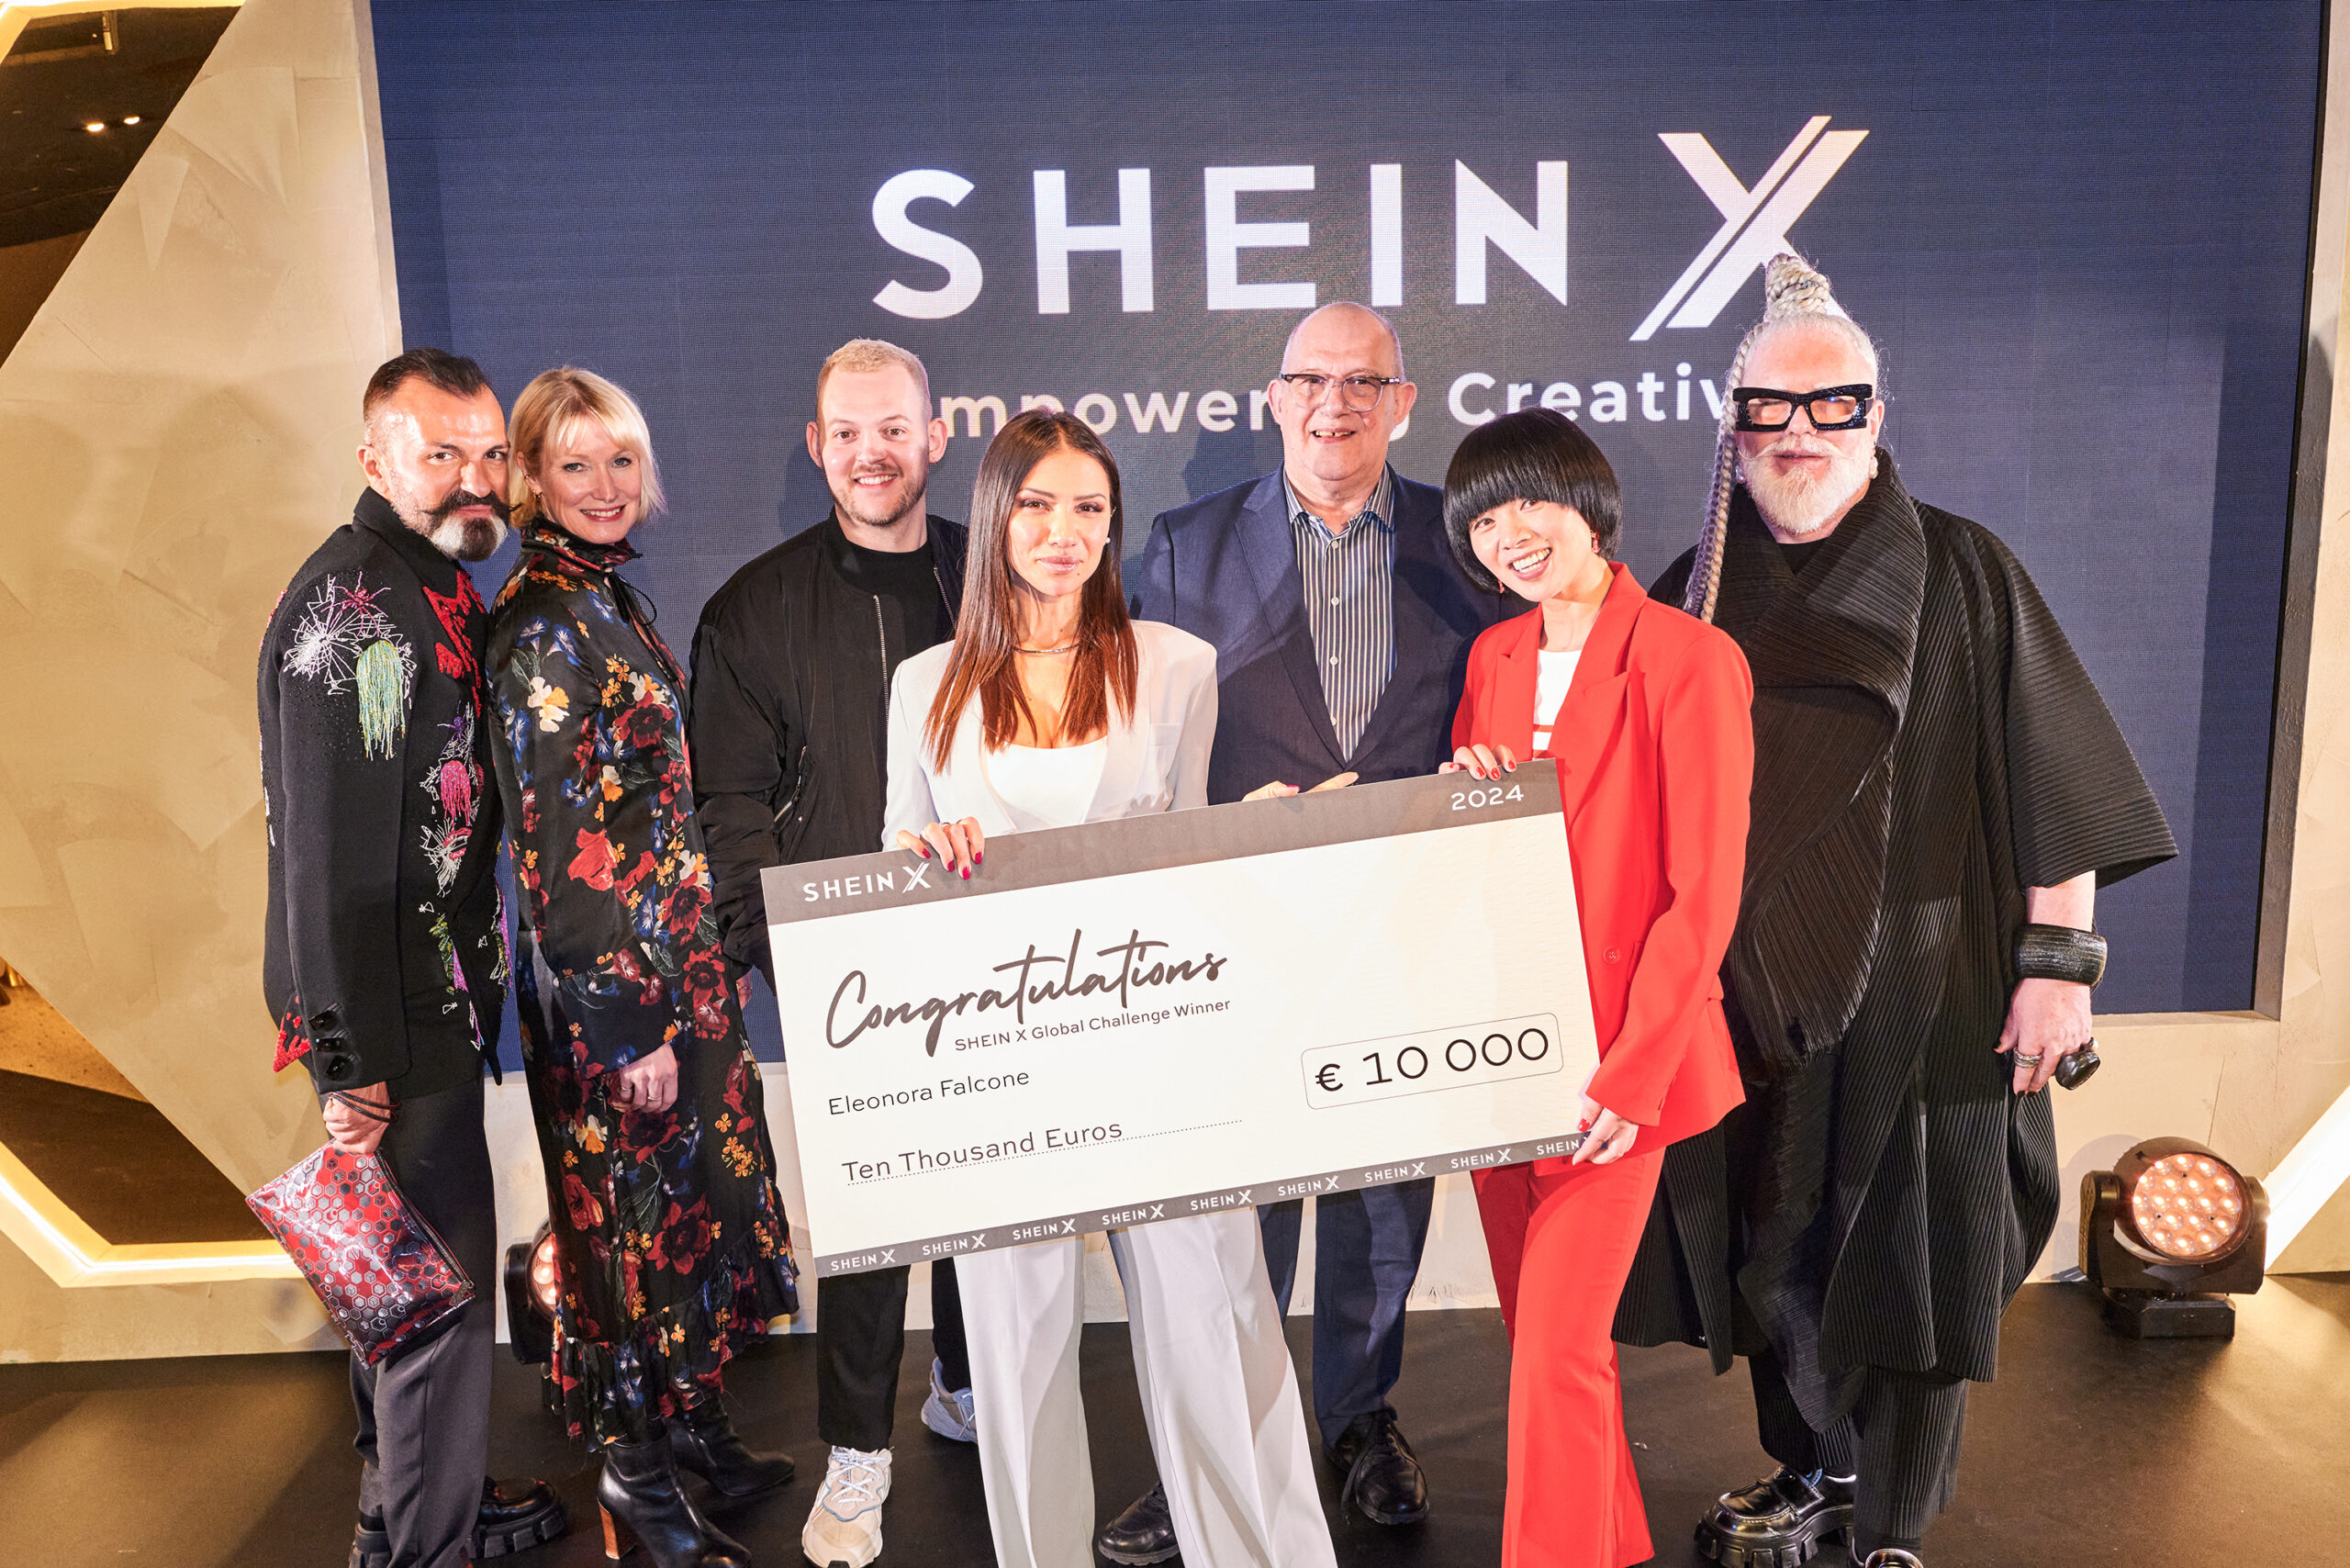 SHEIN Launches evoluSHEIN, New Clothing Line Designed to Make